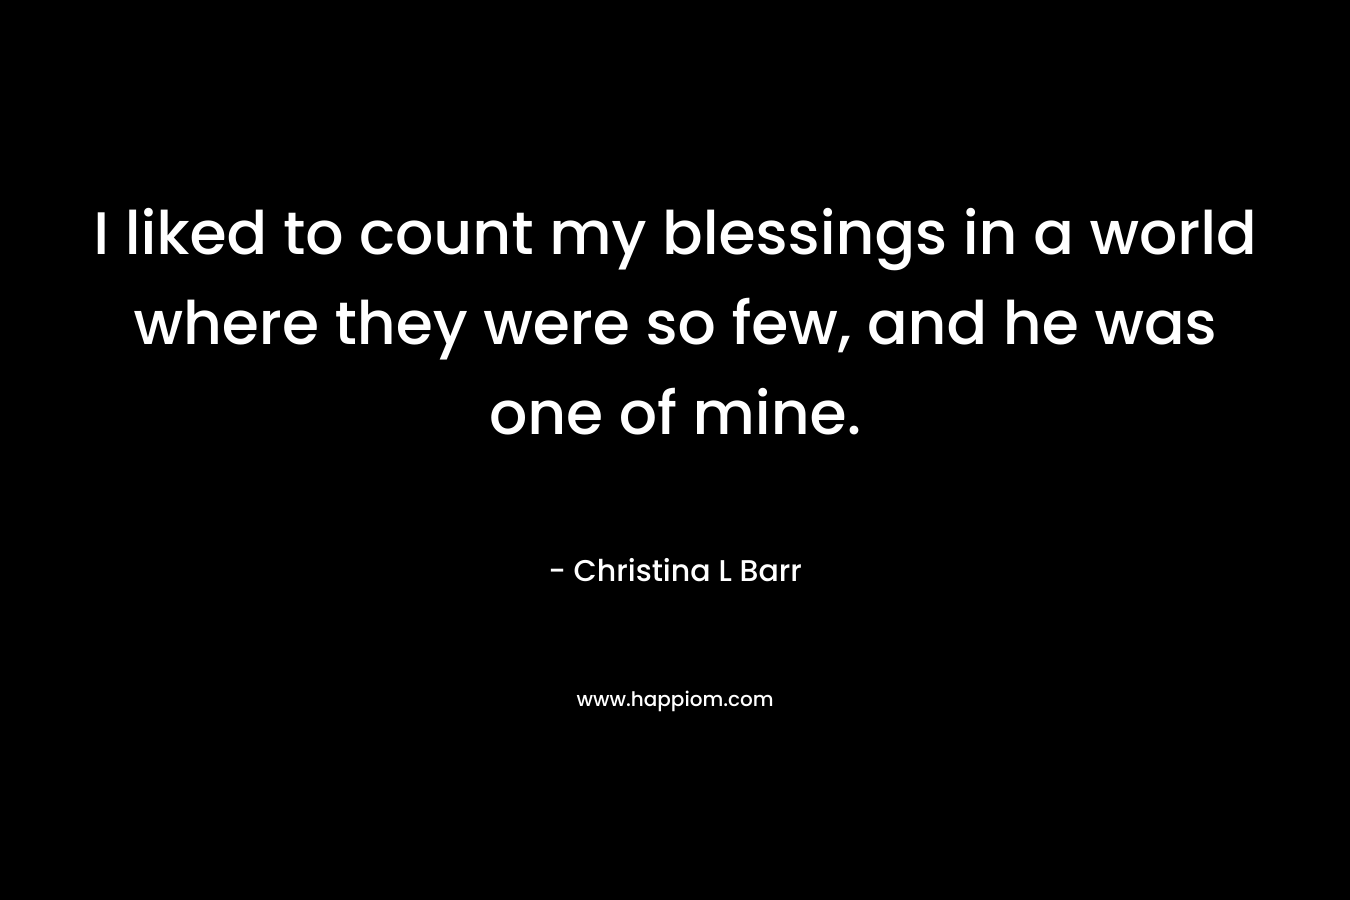 I liked to count my blessings in a world where they were so few, and he was one of mine. – Christina L Barr